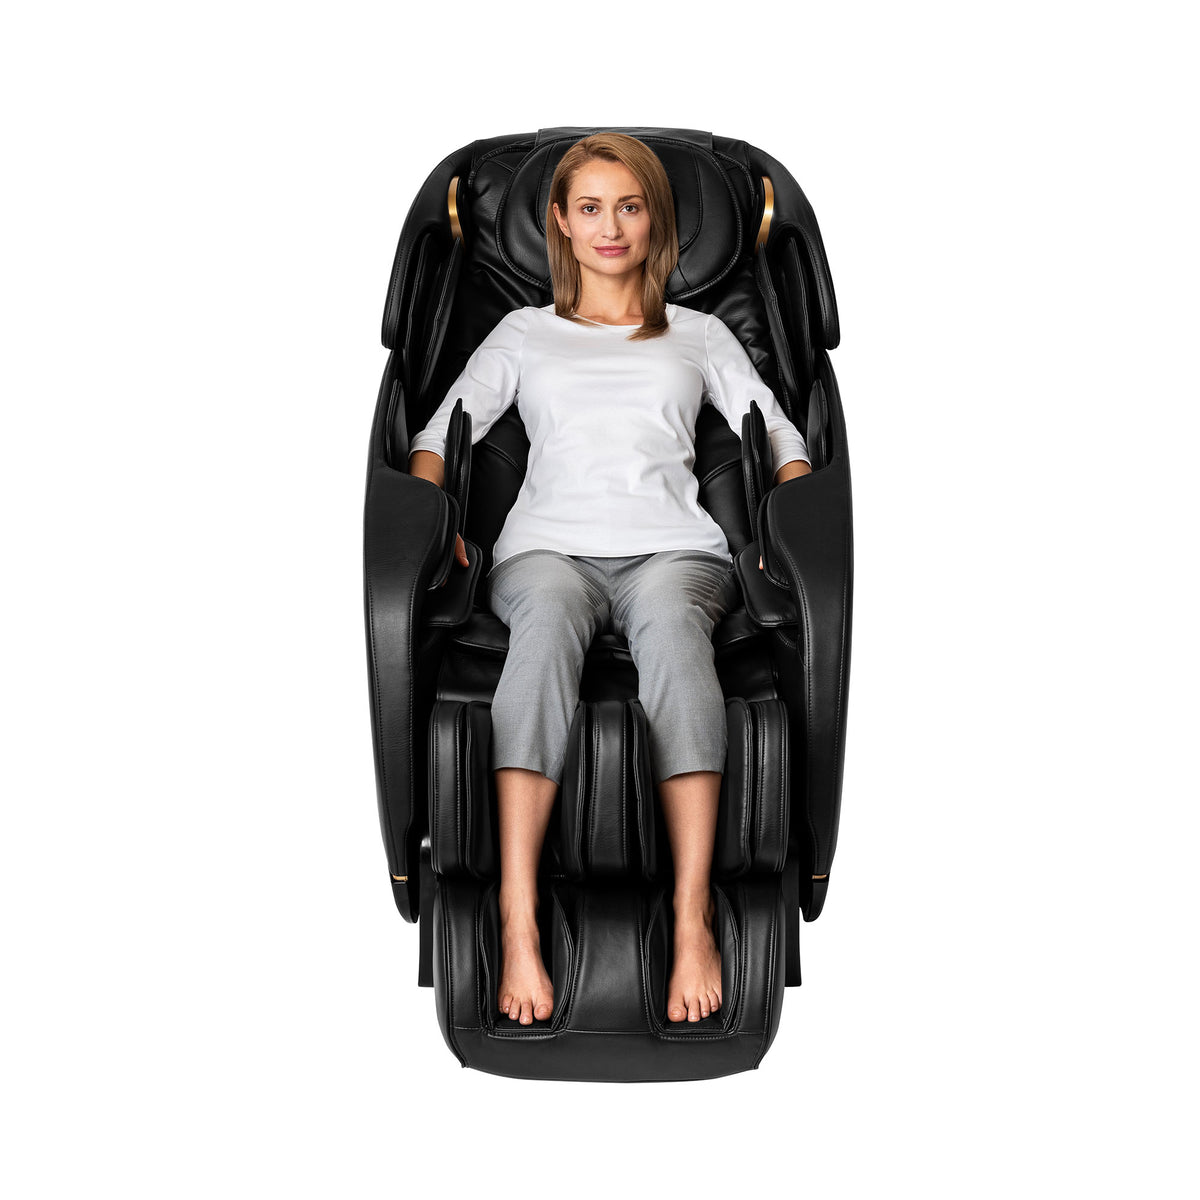 Individual using the Inner Balance Wellness Jin 2.0 Massage Chair for relaxation